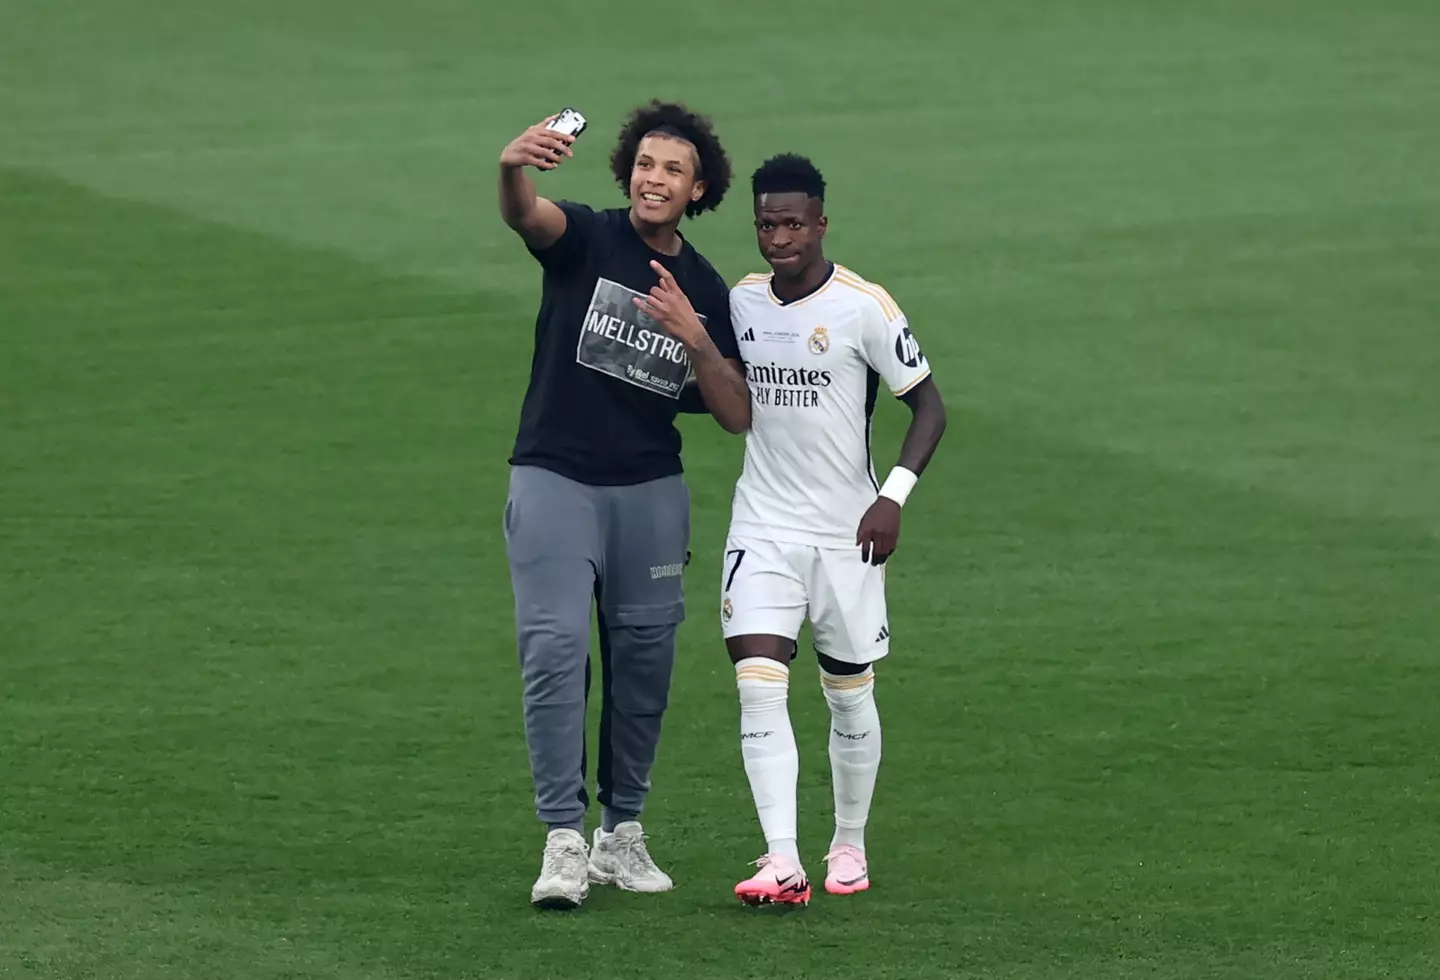 One of the pitch invaders took a picture with Vinicius Jr (Getty)